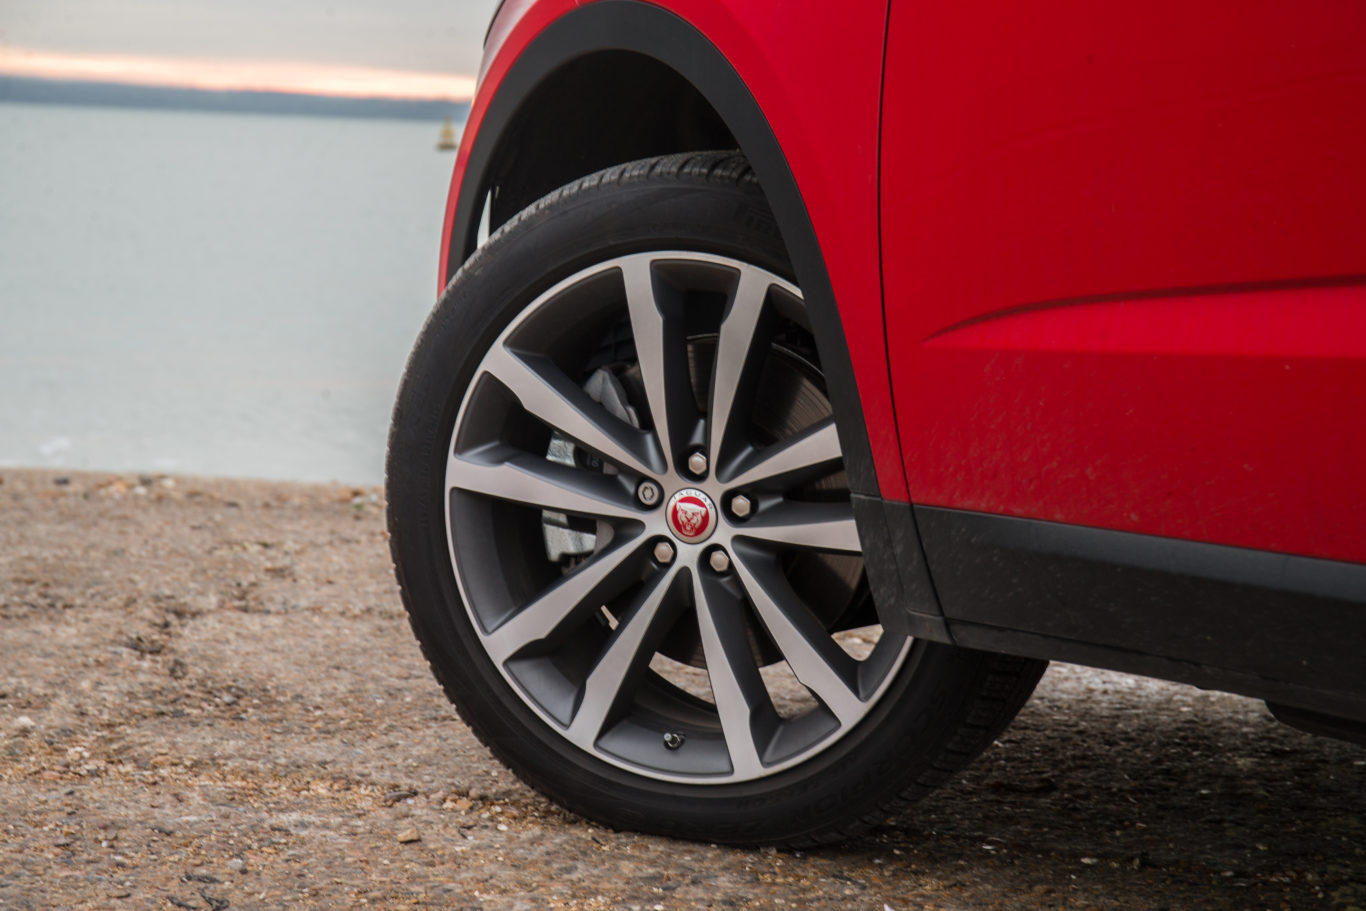 Large alloy wheels give the E-Pace a lot of presence